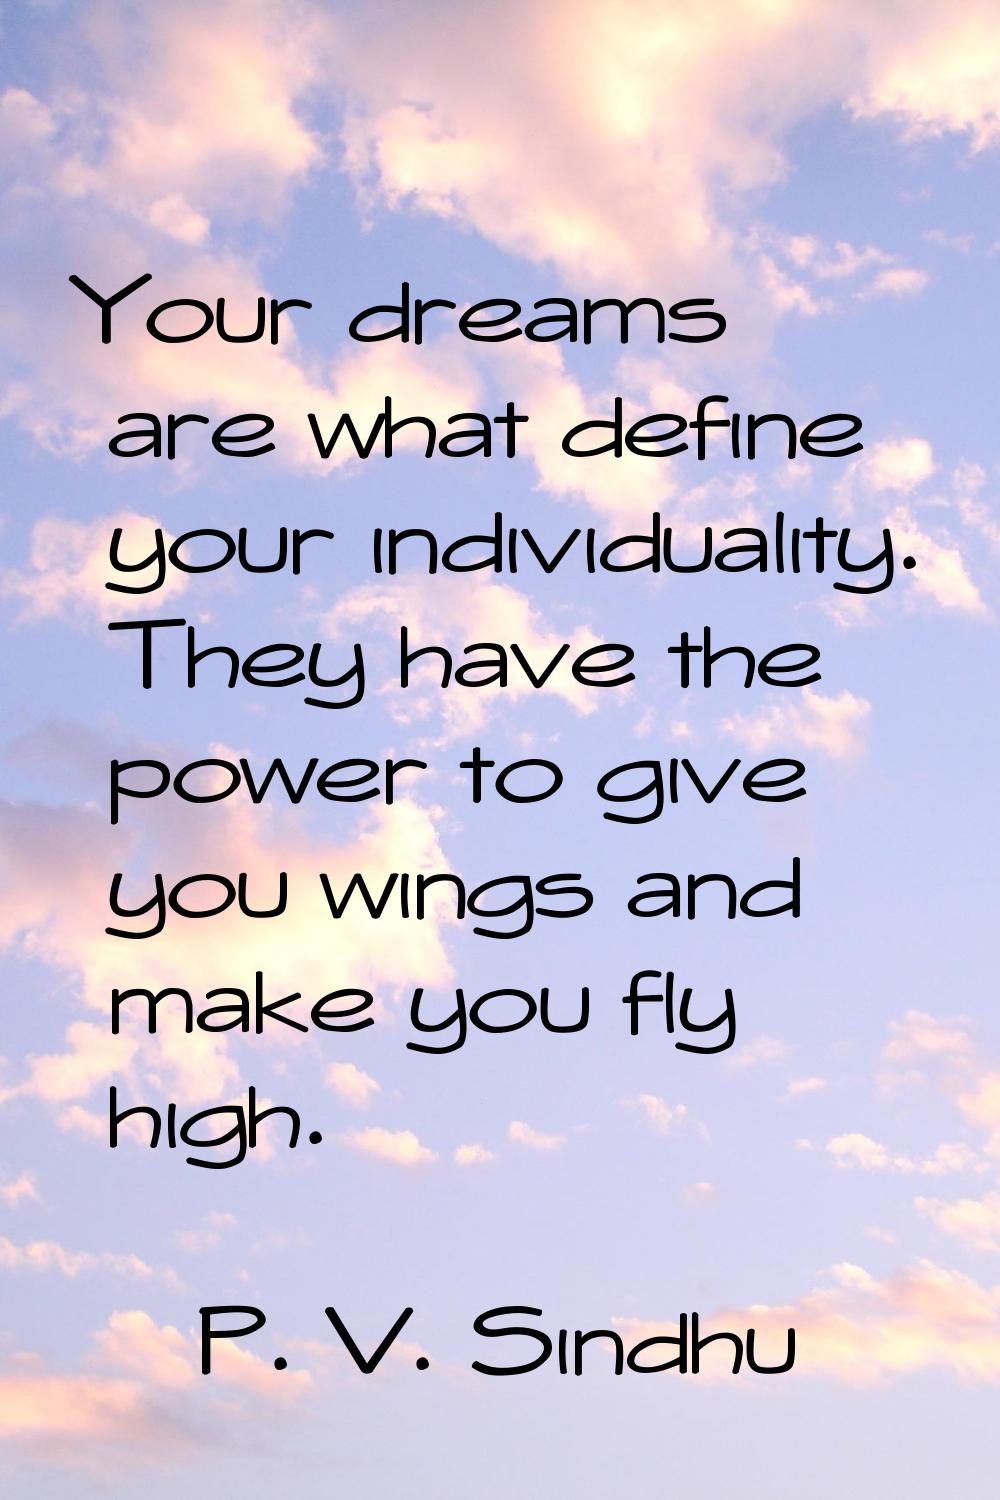 Your dreams are what define your individuality. They have the power to give you wings and make you 